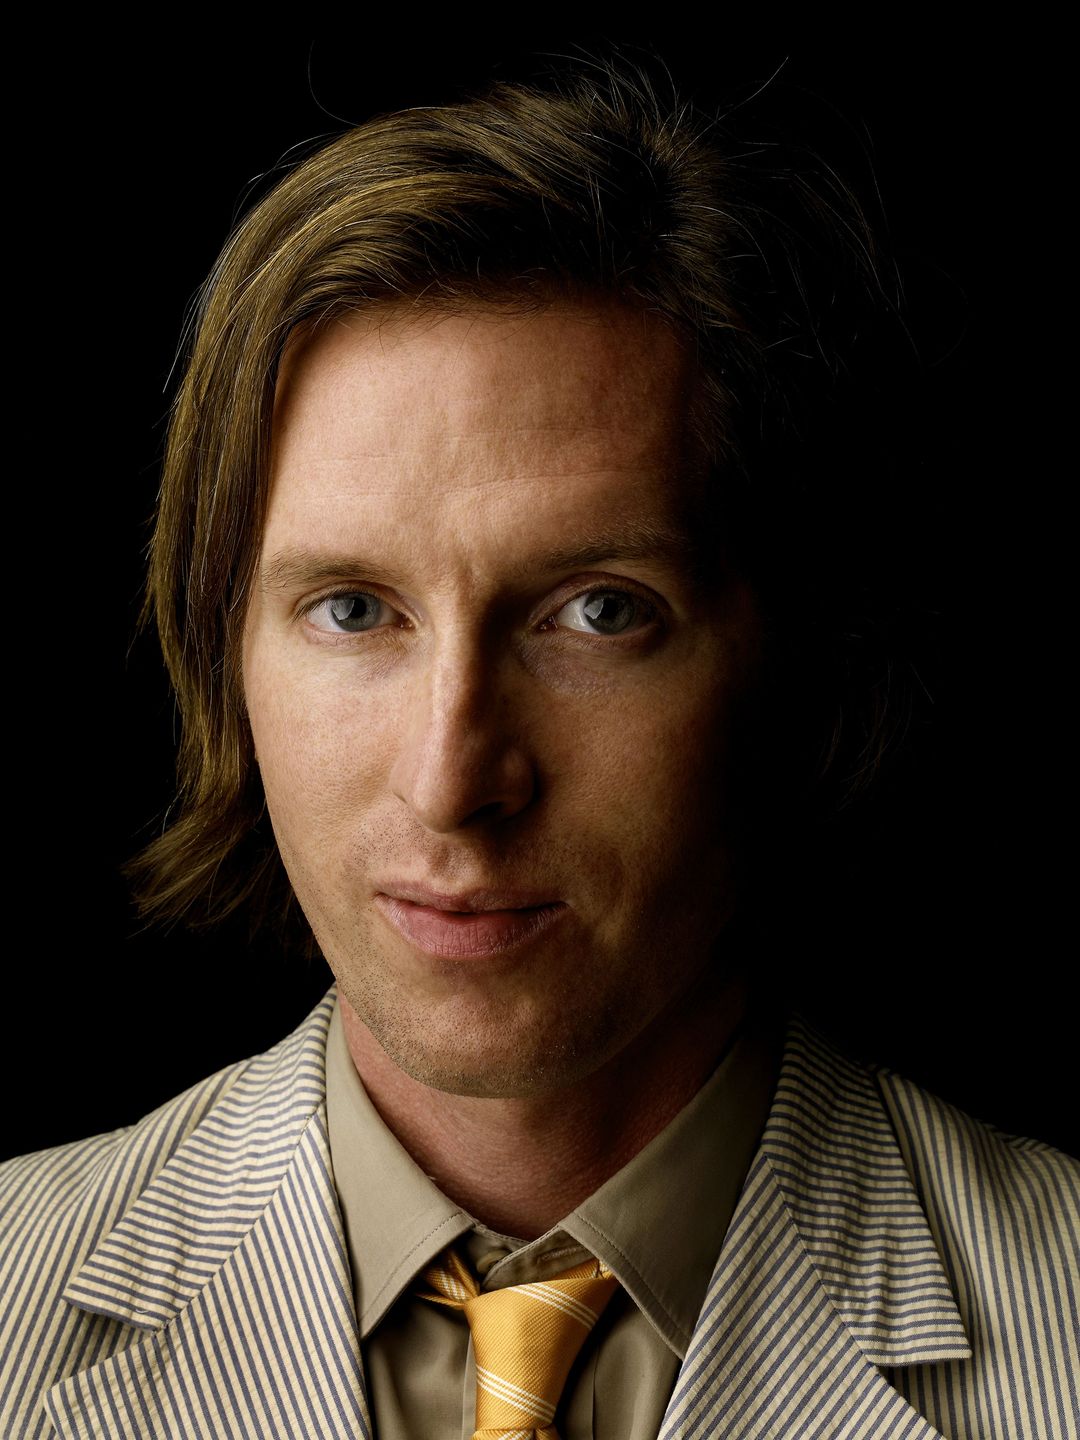 Wes Anderson how old is he